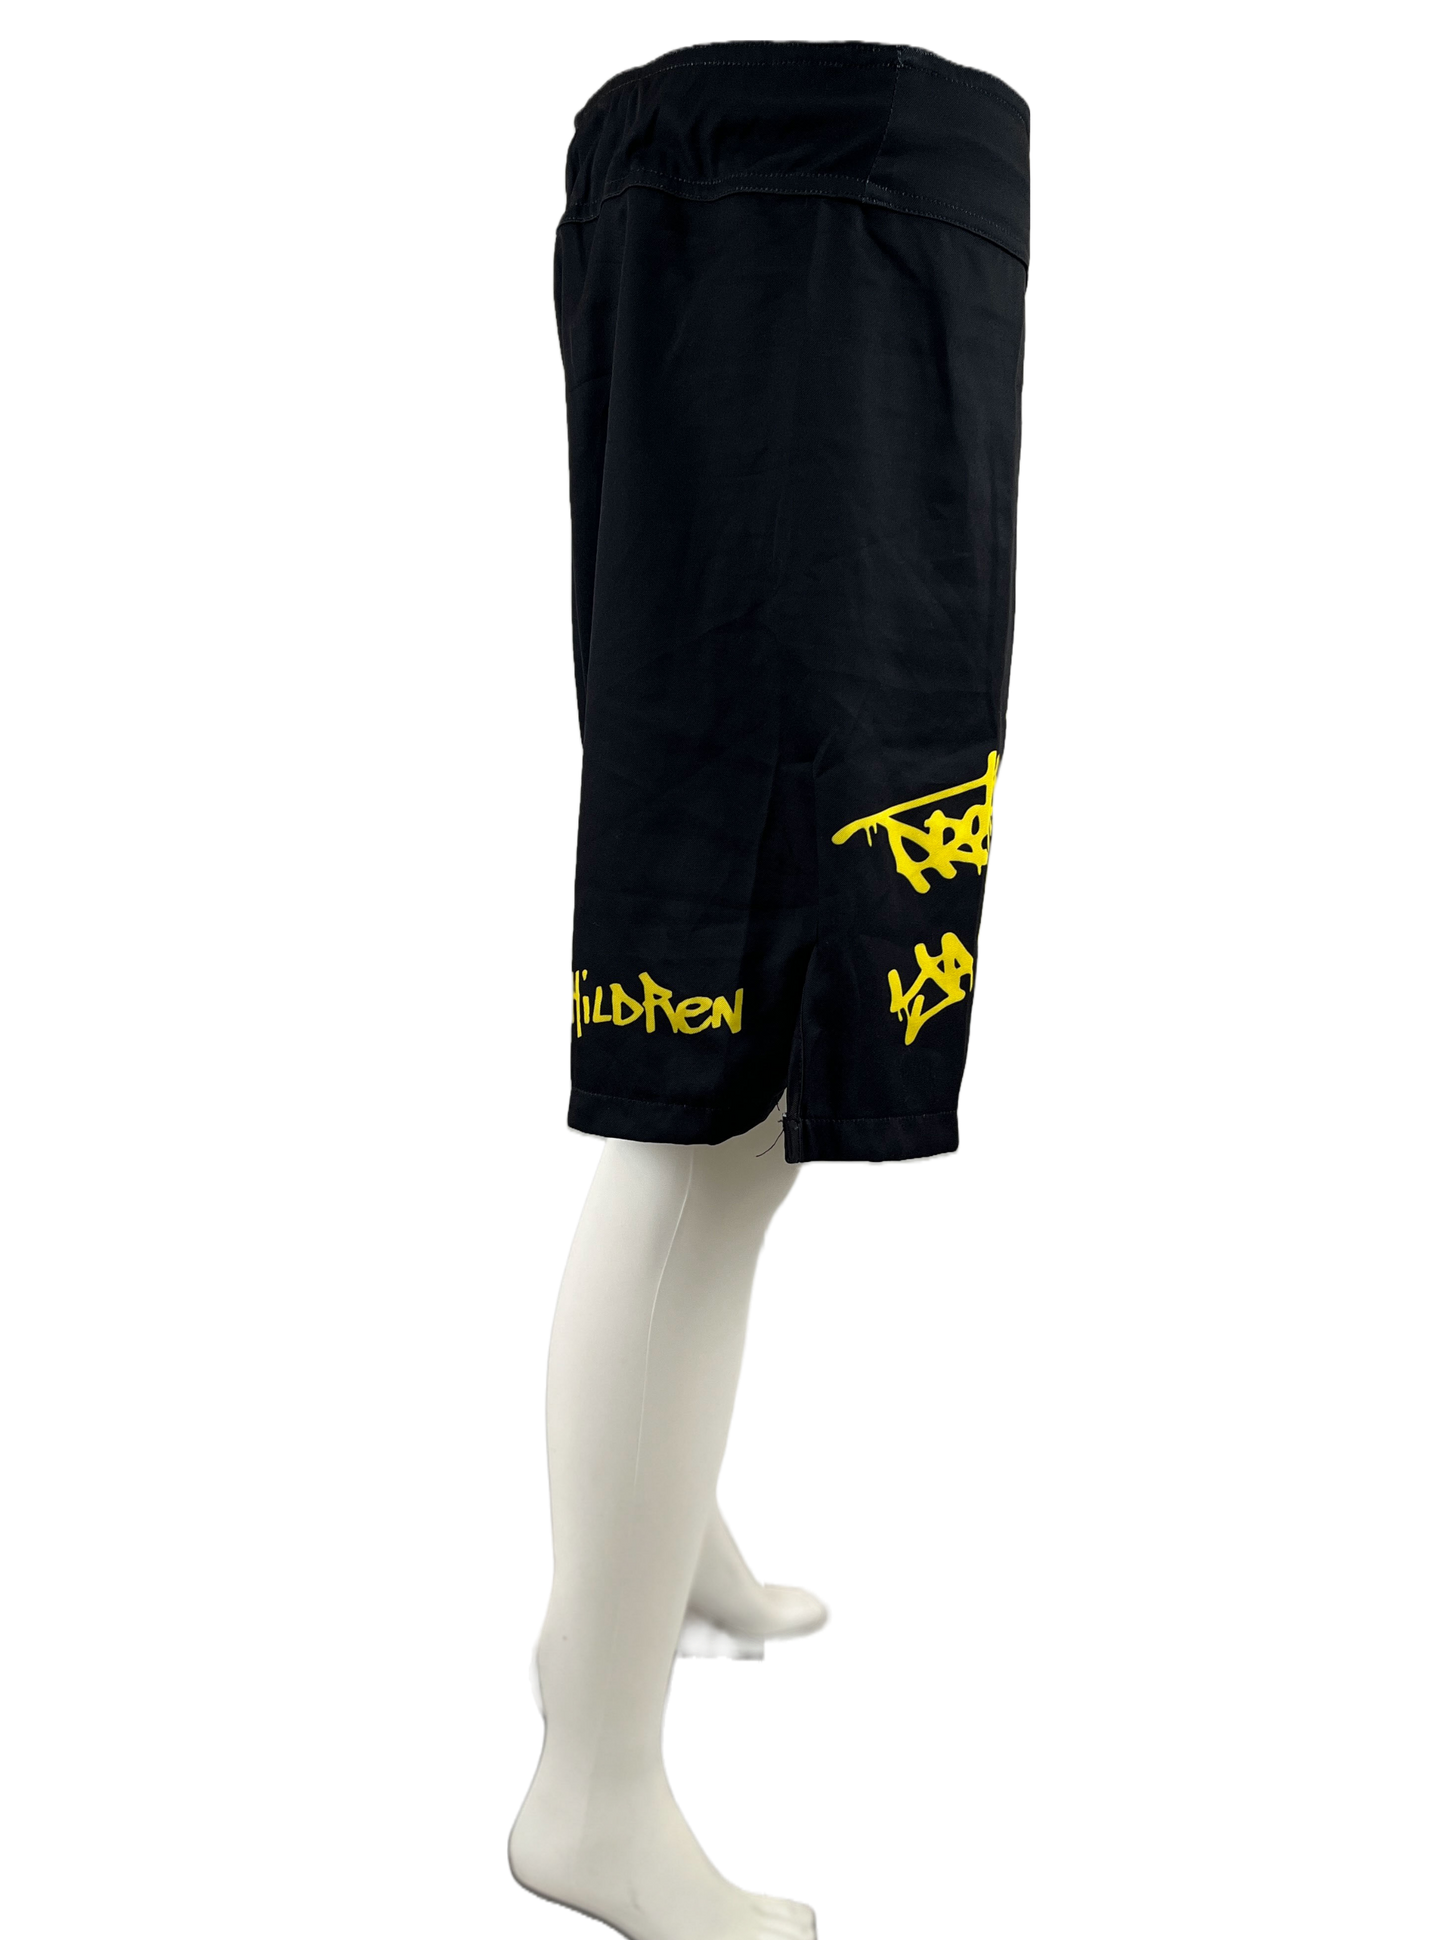 black and yellow loose fit mma shorts for grappling killa bees worldwide protect ya neck front right leg for the children back left right side profile